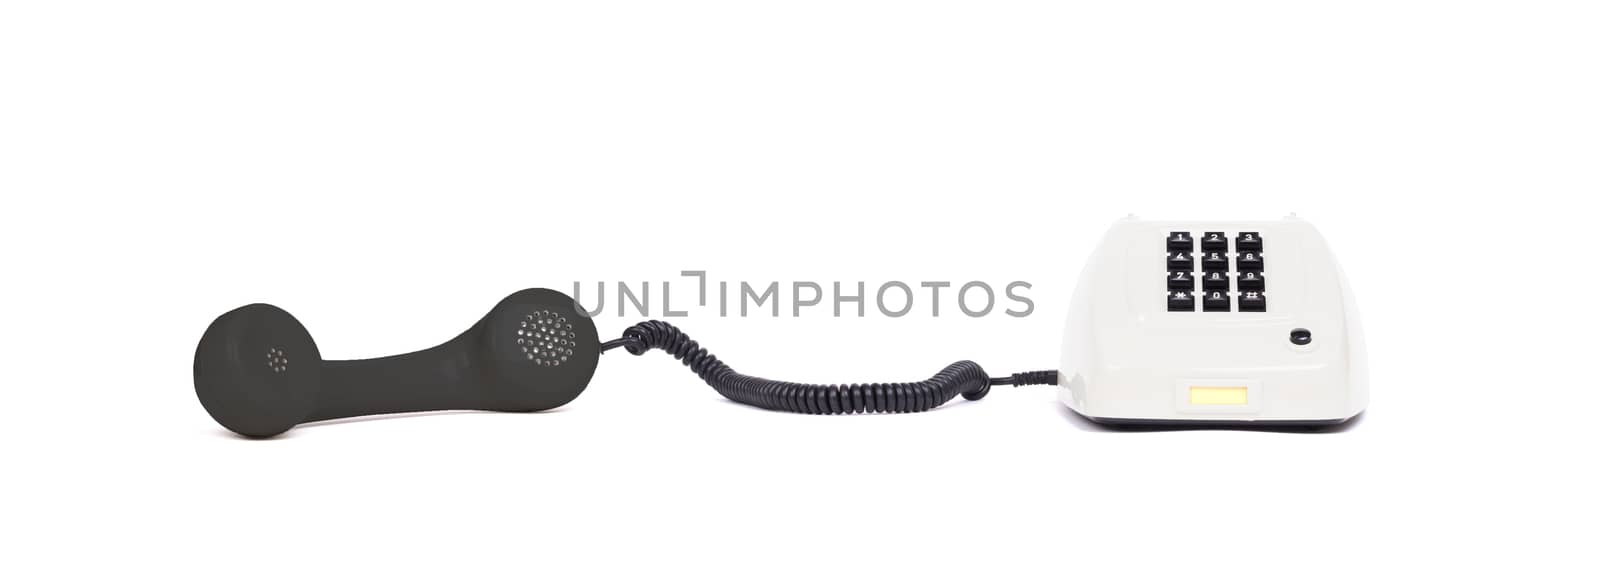 Vintage multi colored telephone with a white background